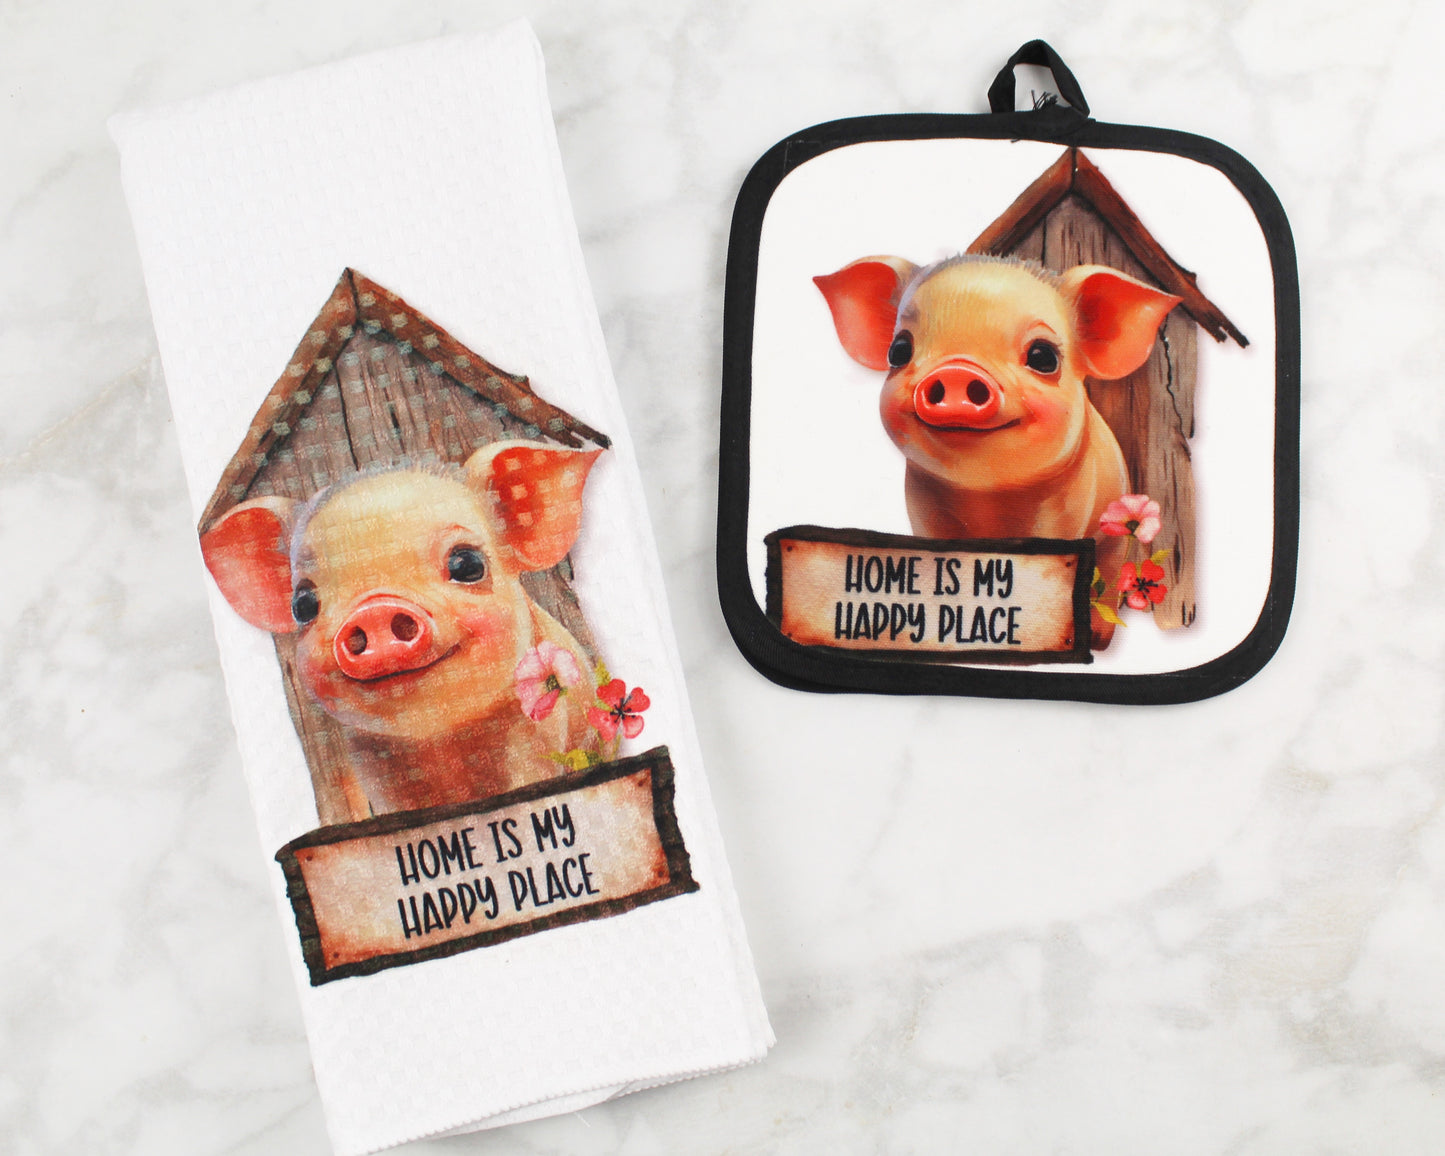 Home Is My Happy Place Pig Towel/Pot Holder Set